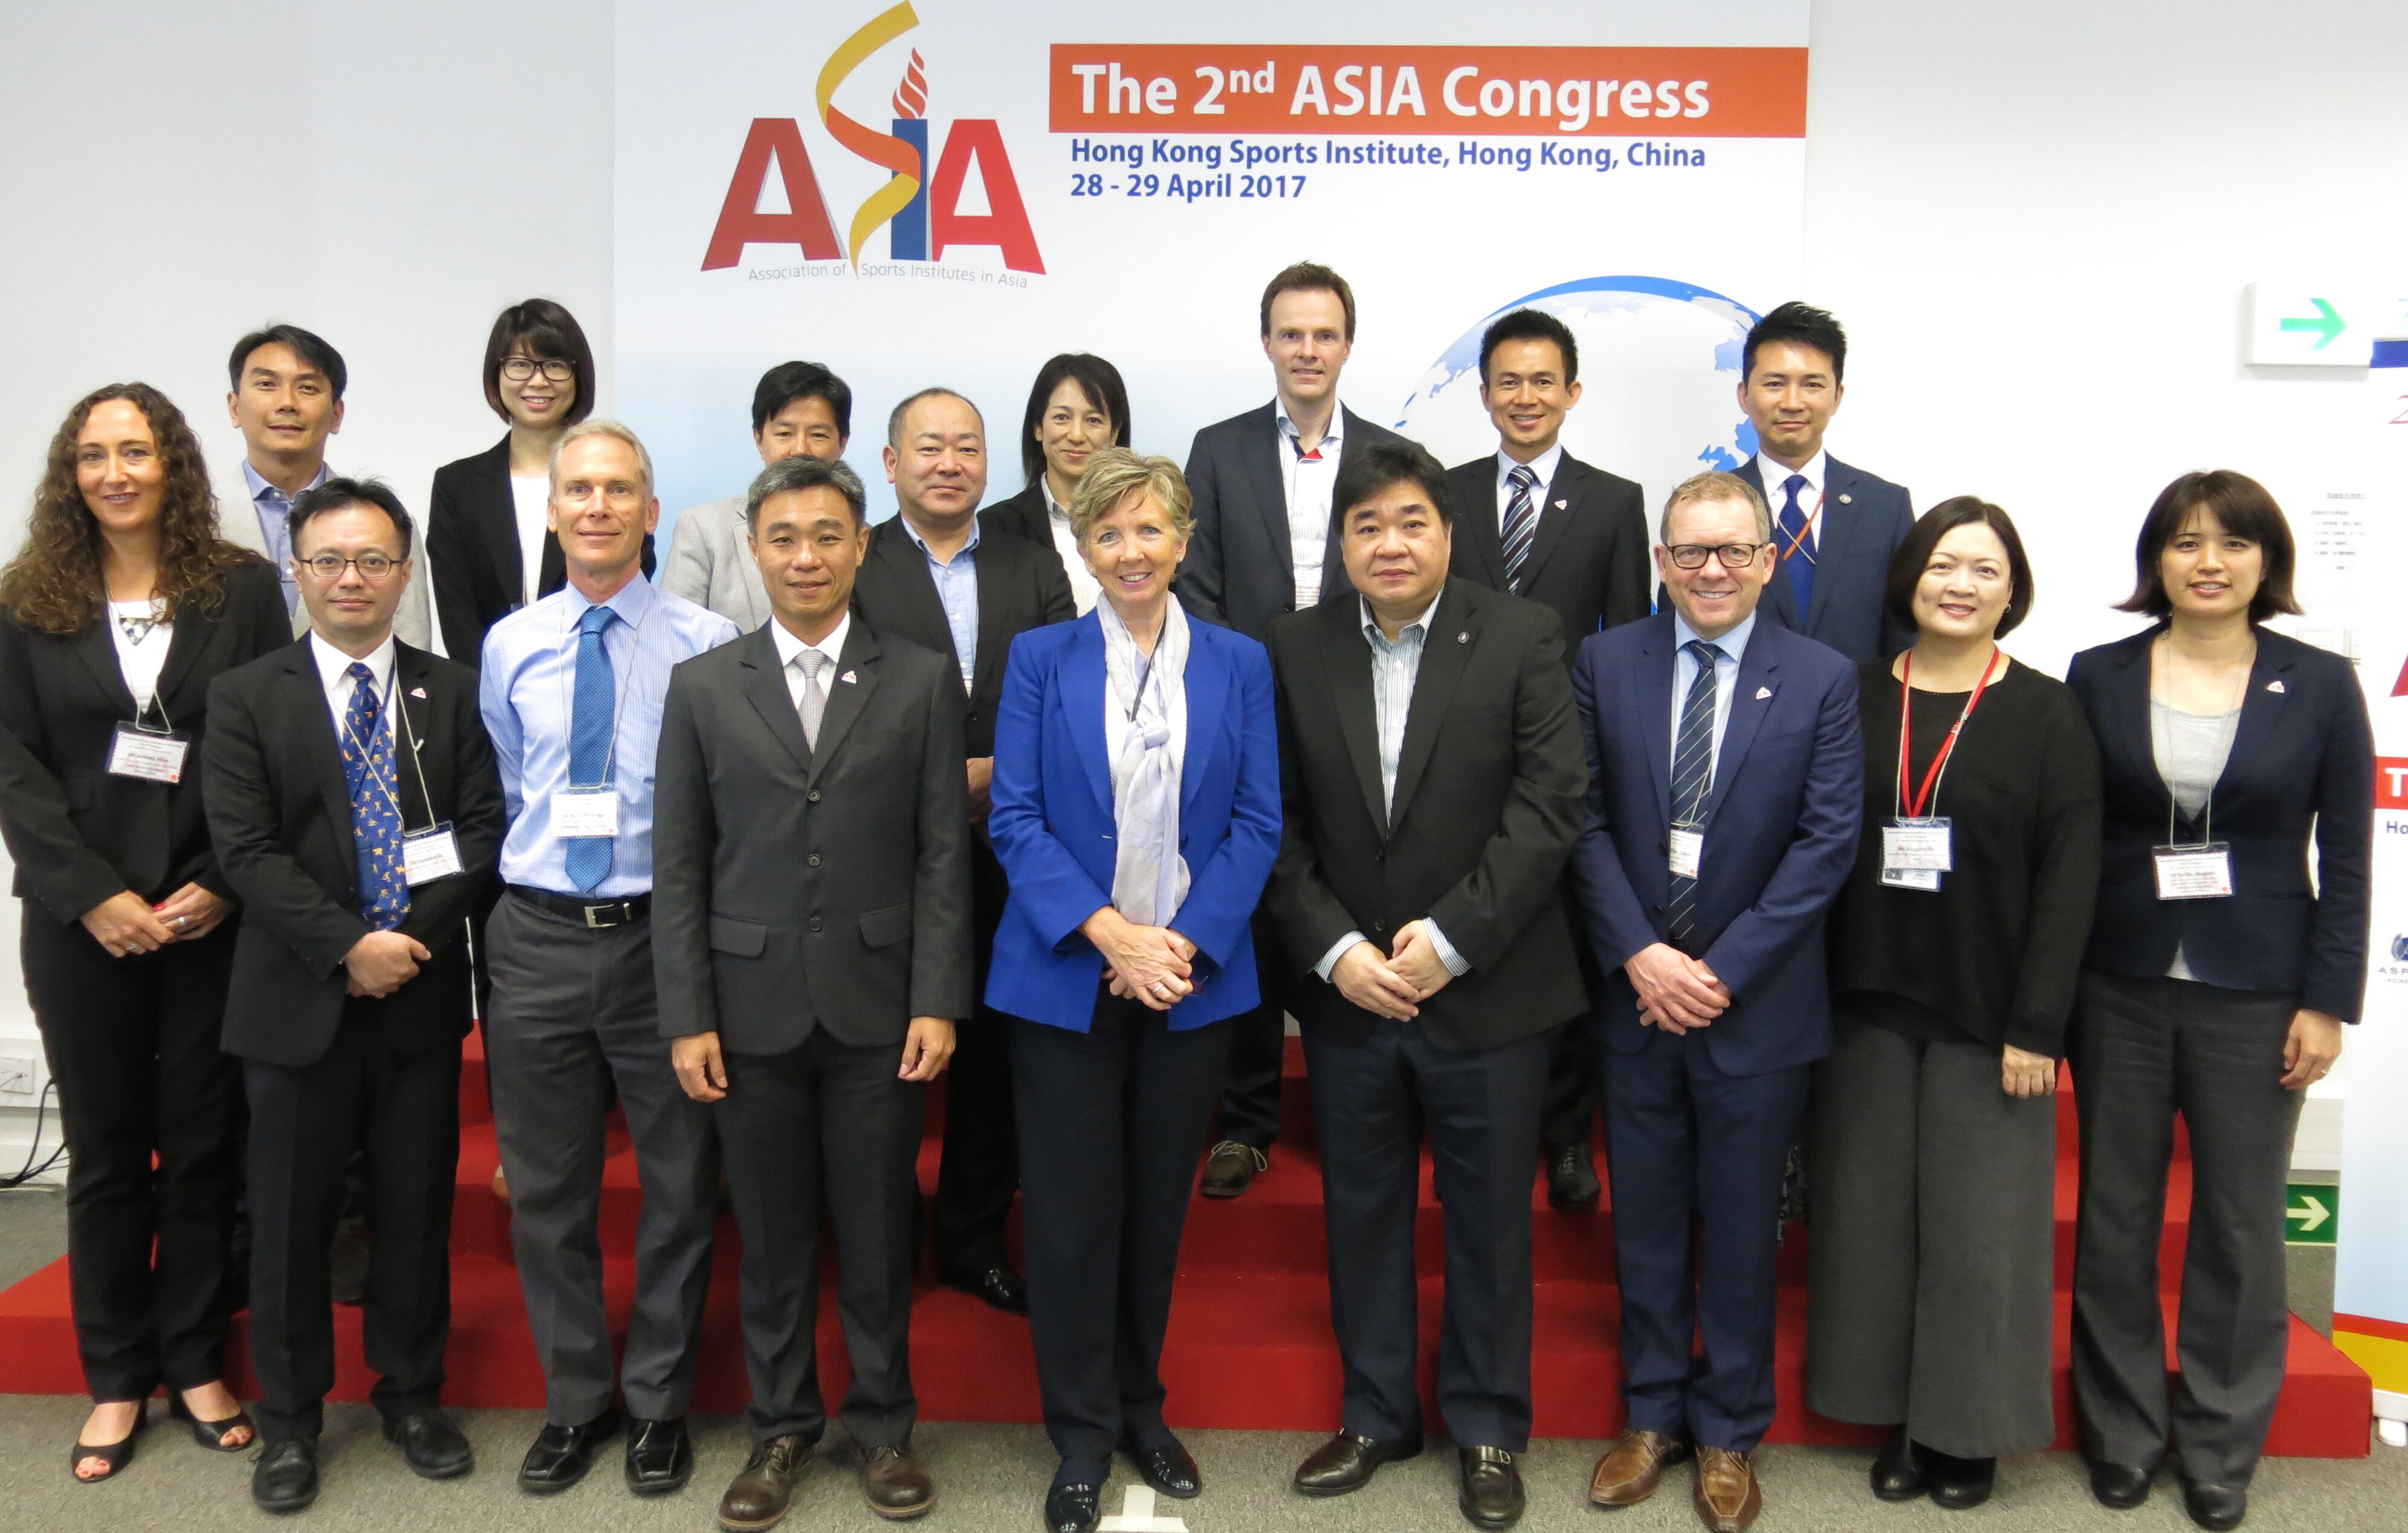 The 2nd ASIA Congress